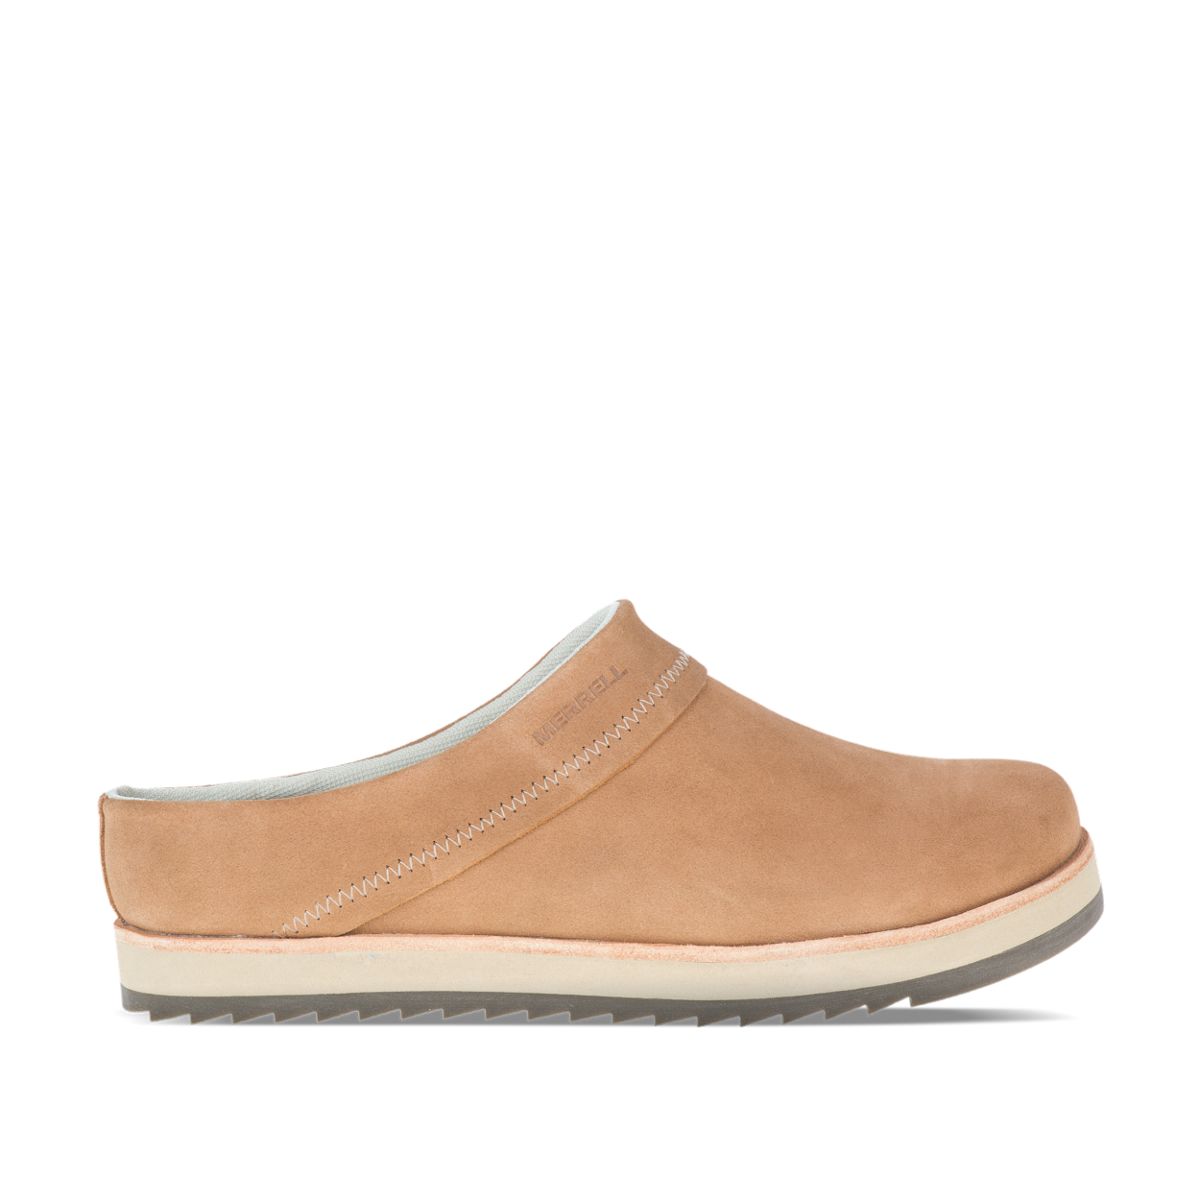 merrell suede slip on shoes